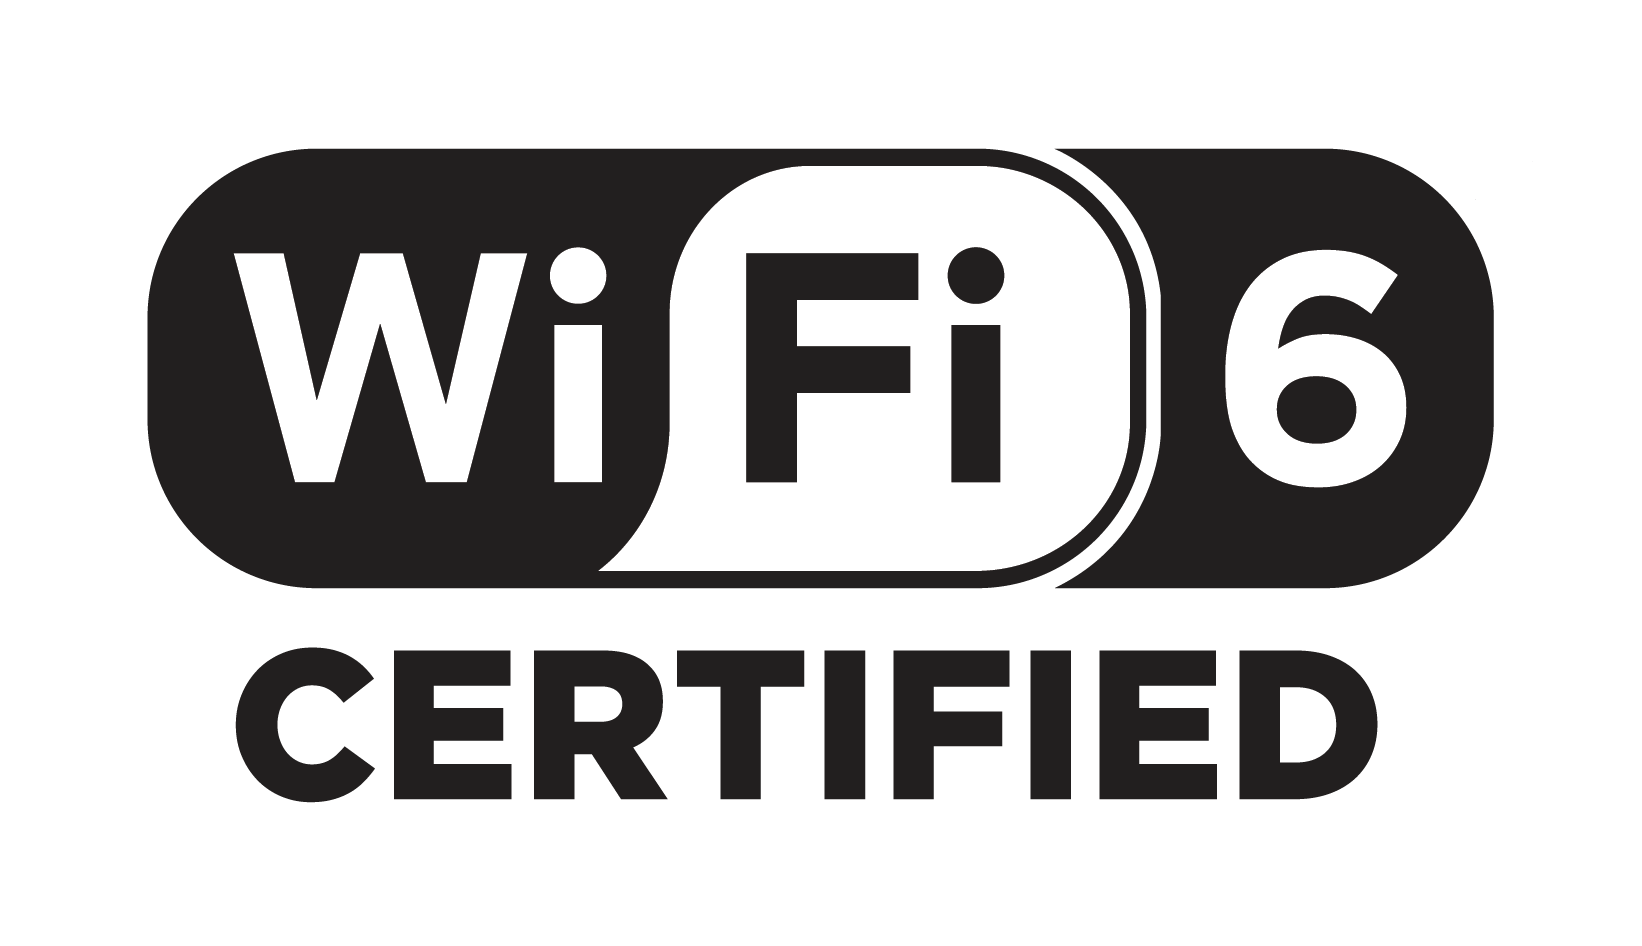 Wi-Fi Certified 6 Program Available for Products based on Broadcom, Cypress, Intel, Marvell, and Qualcomm 802.11ax Chips - CNX Software